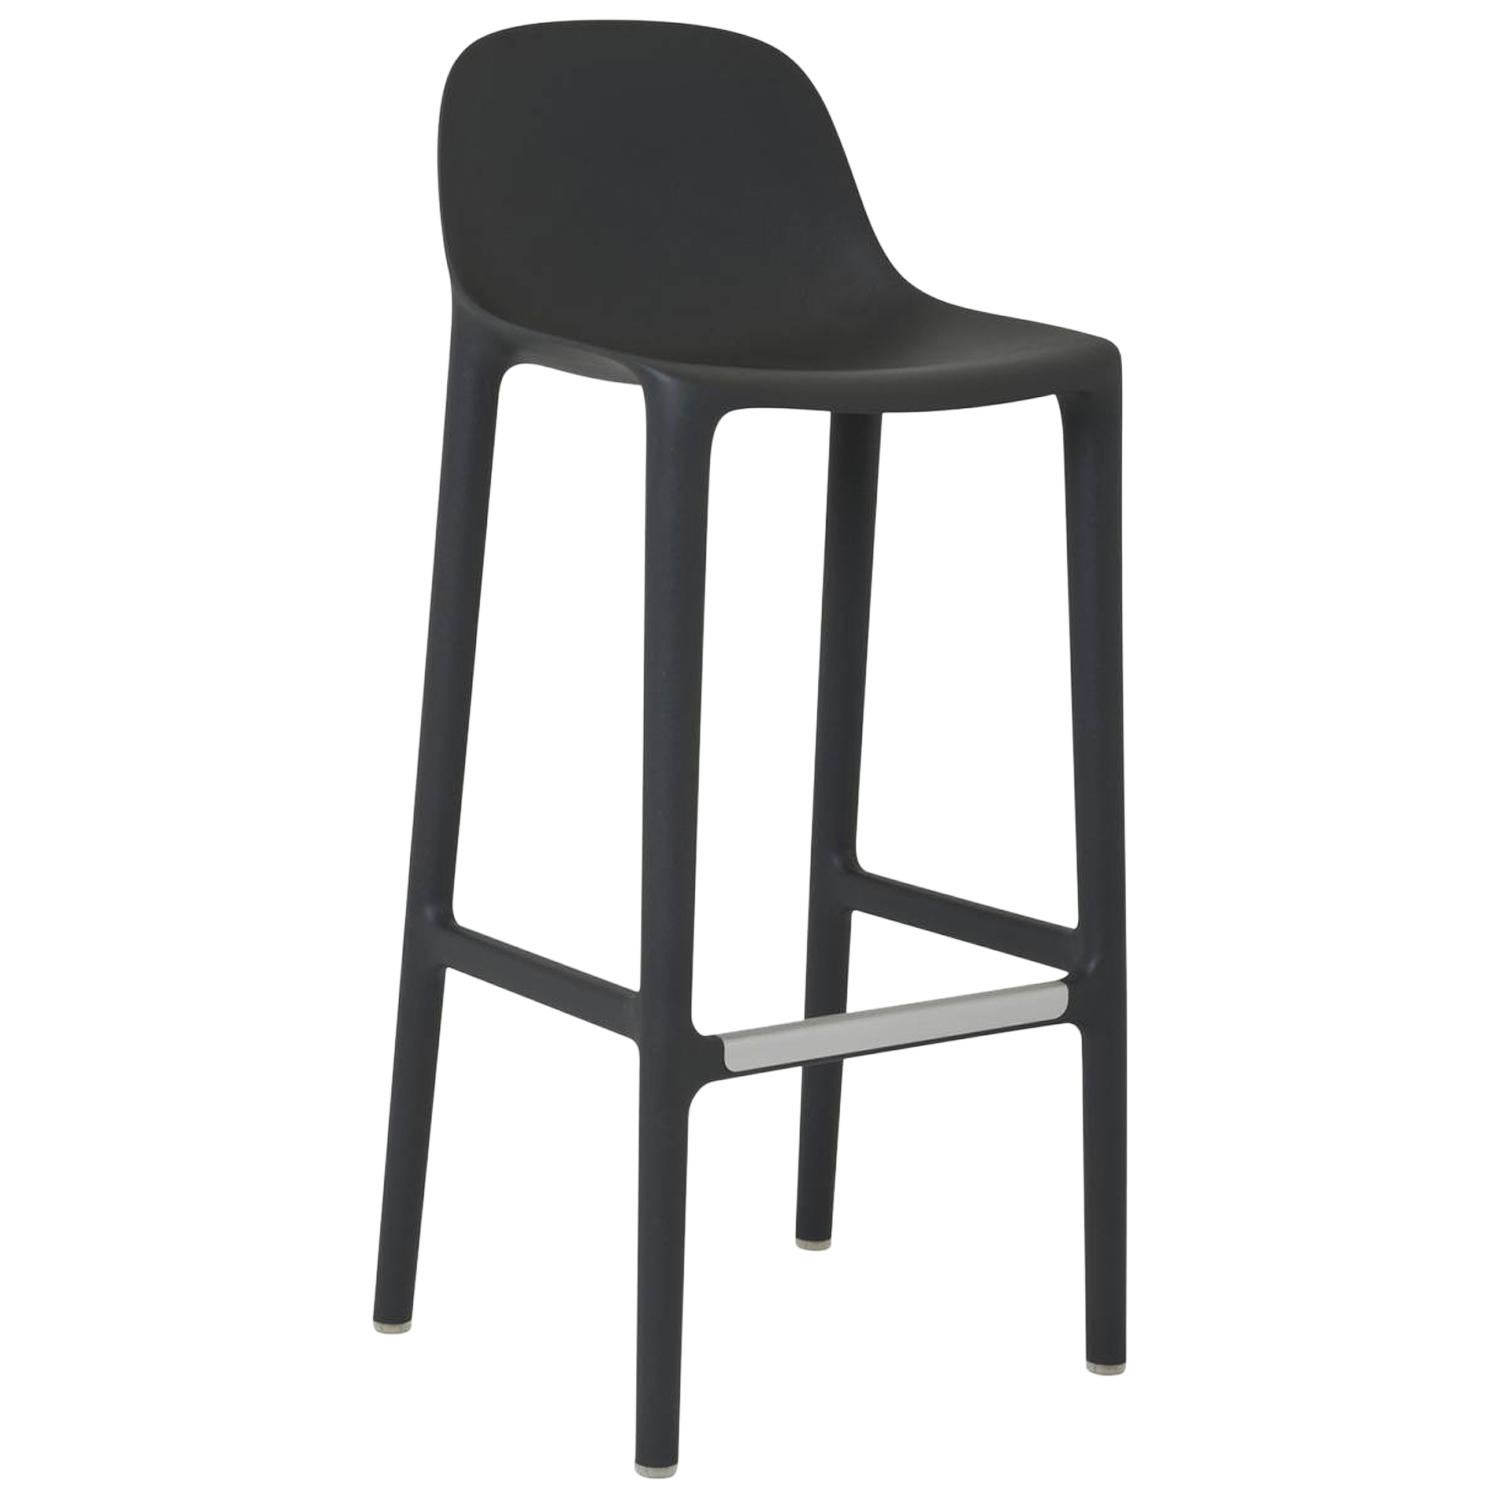 Emeco Broom Barstool in Dark Gray by Philippe Starck For Sale